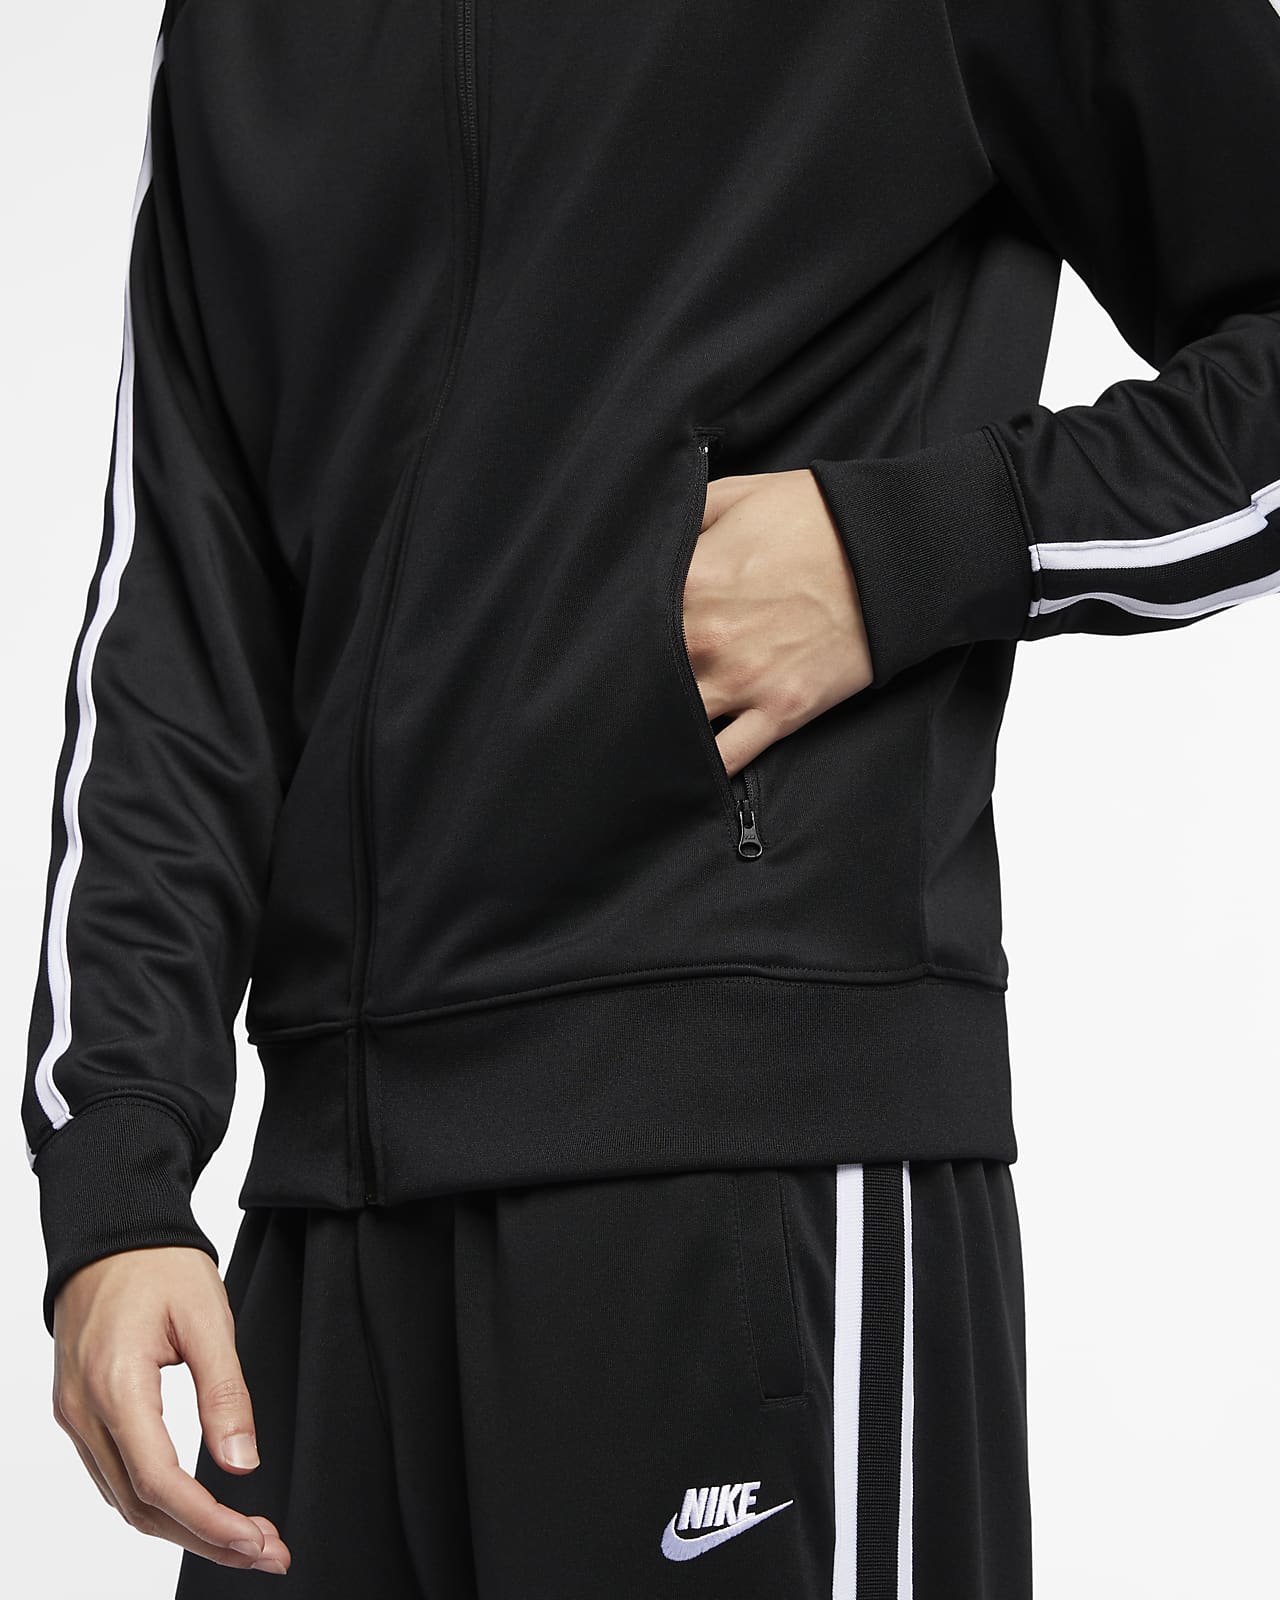 mens nike basketball warm up suits